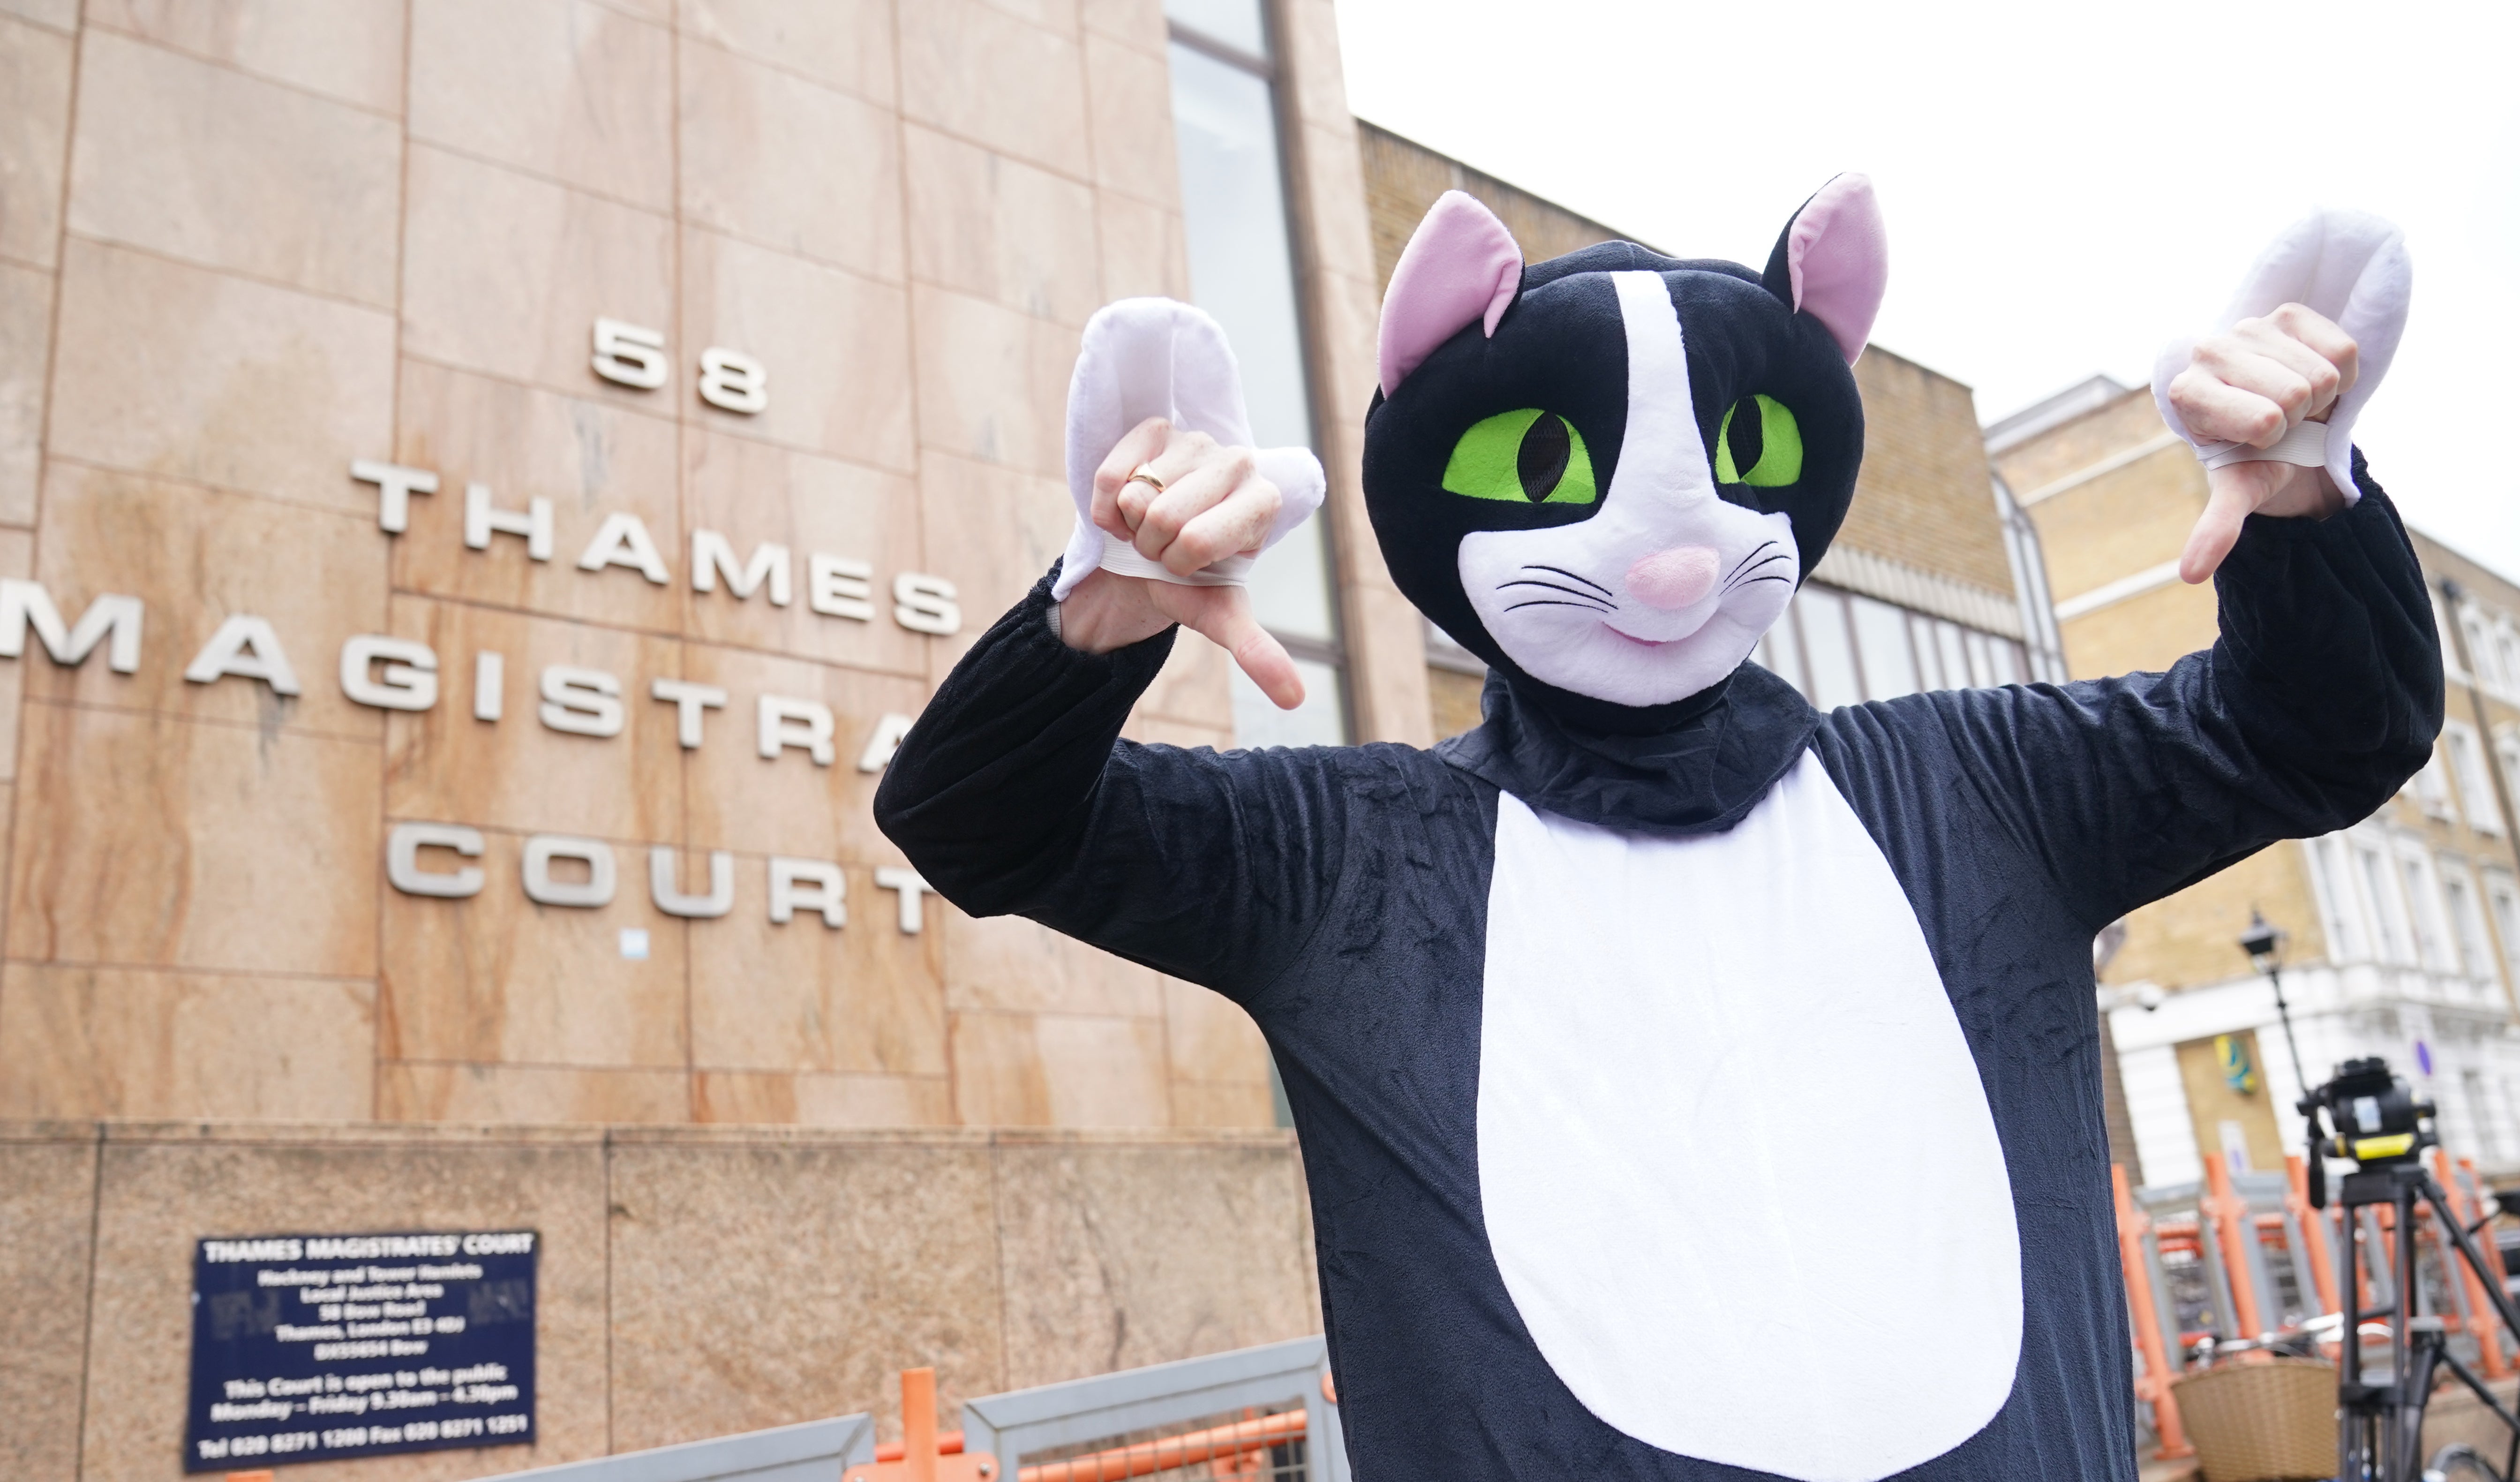 A person dressed as a cat outside Thames Magistrates’ Court (Yui Mok/PA)